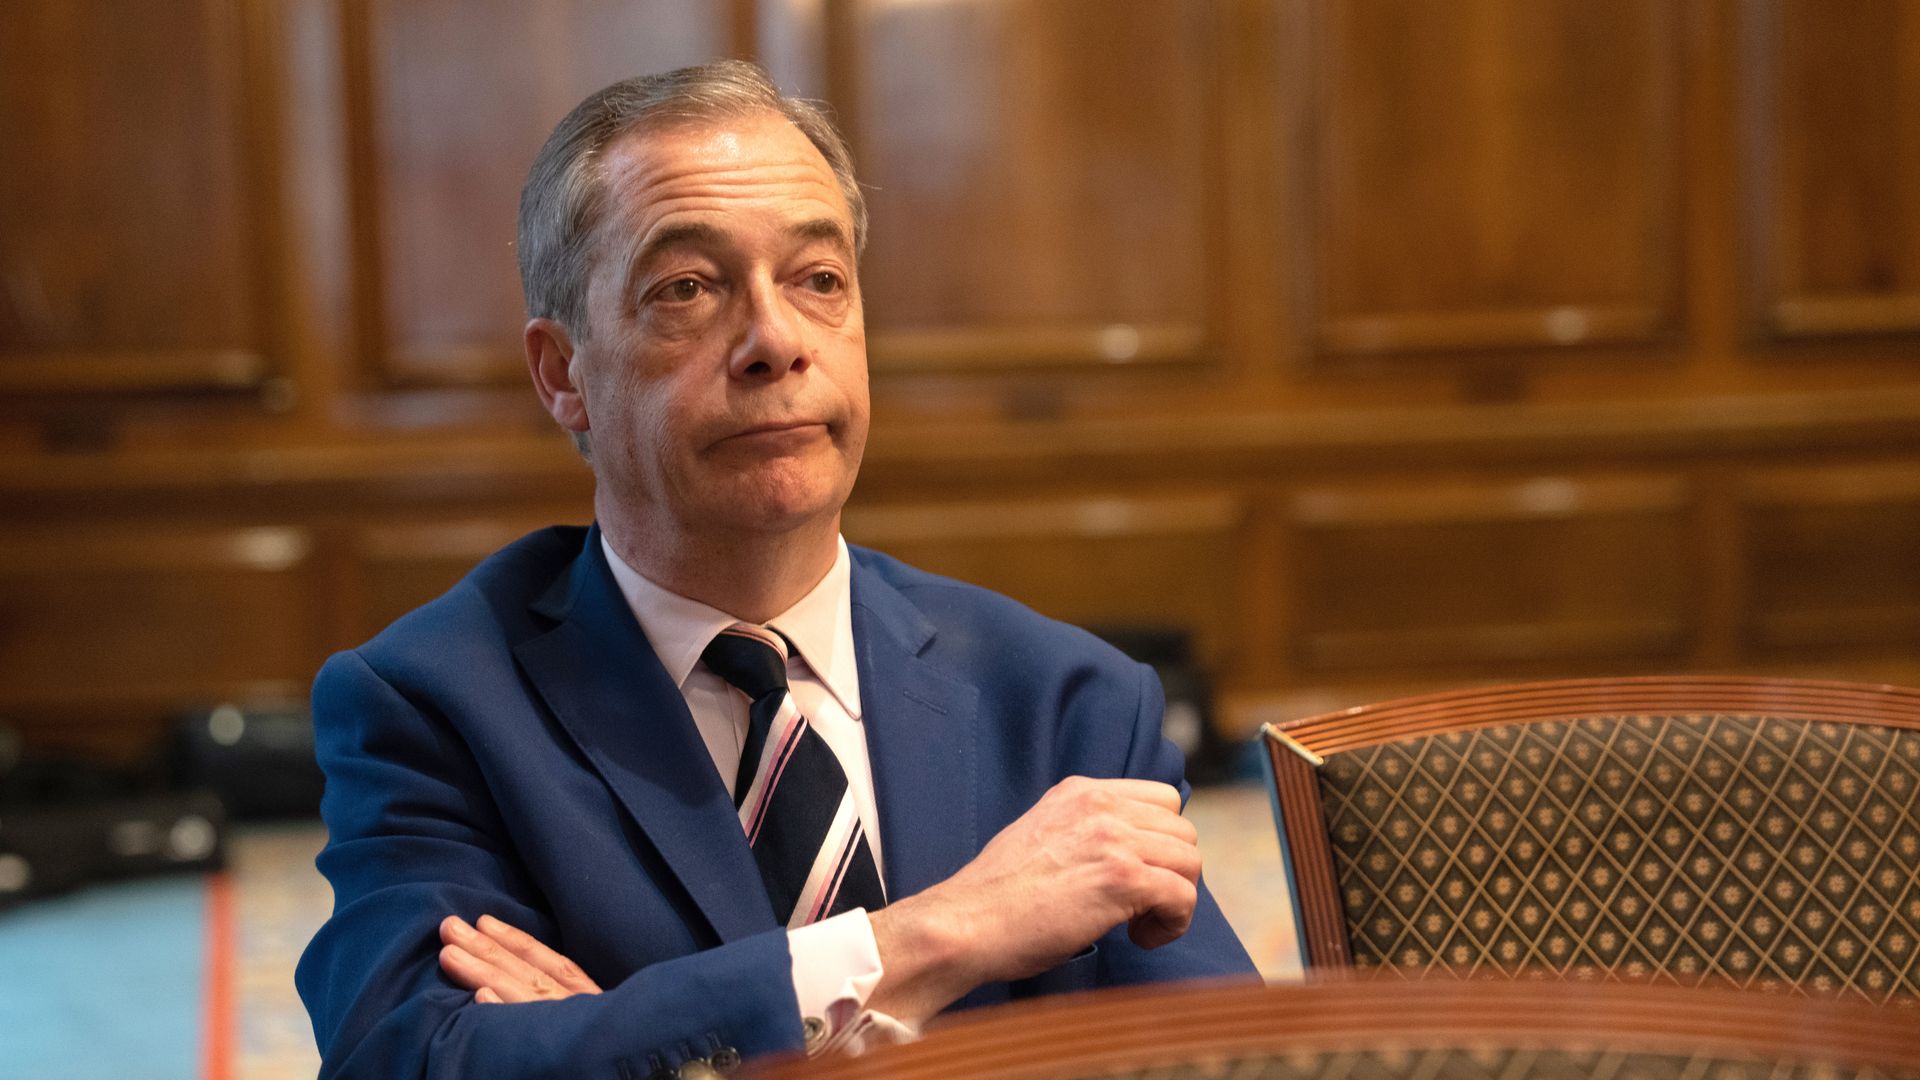 Nigel Farage might be taking part in Strictly 